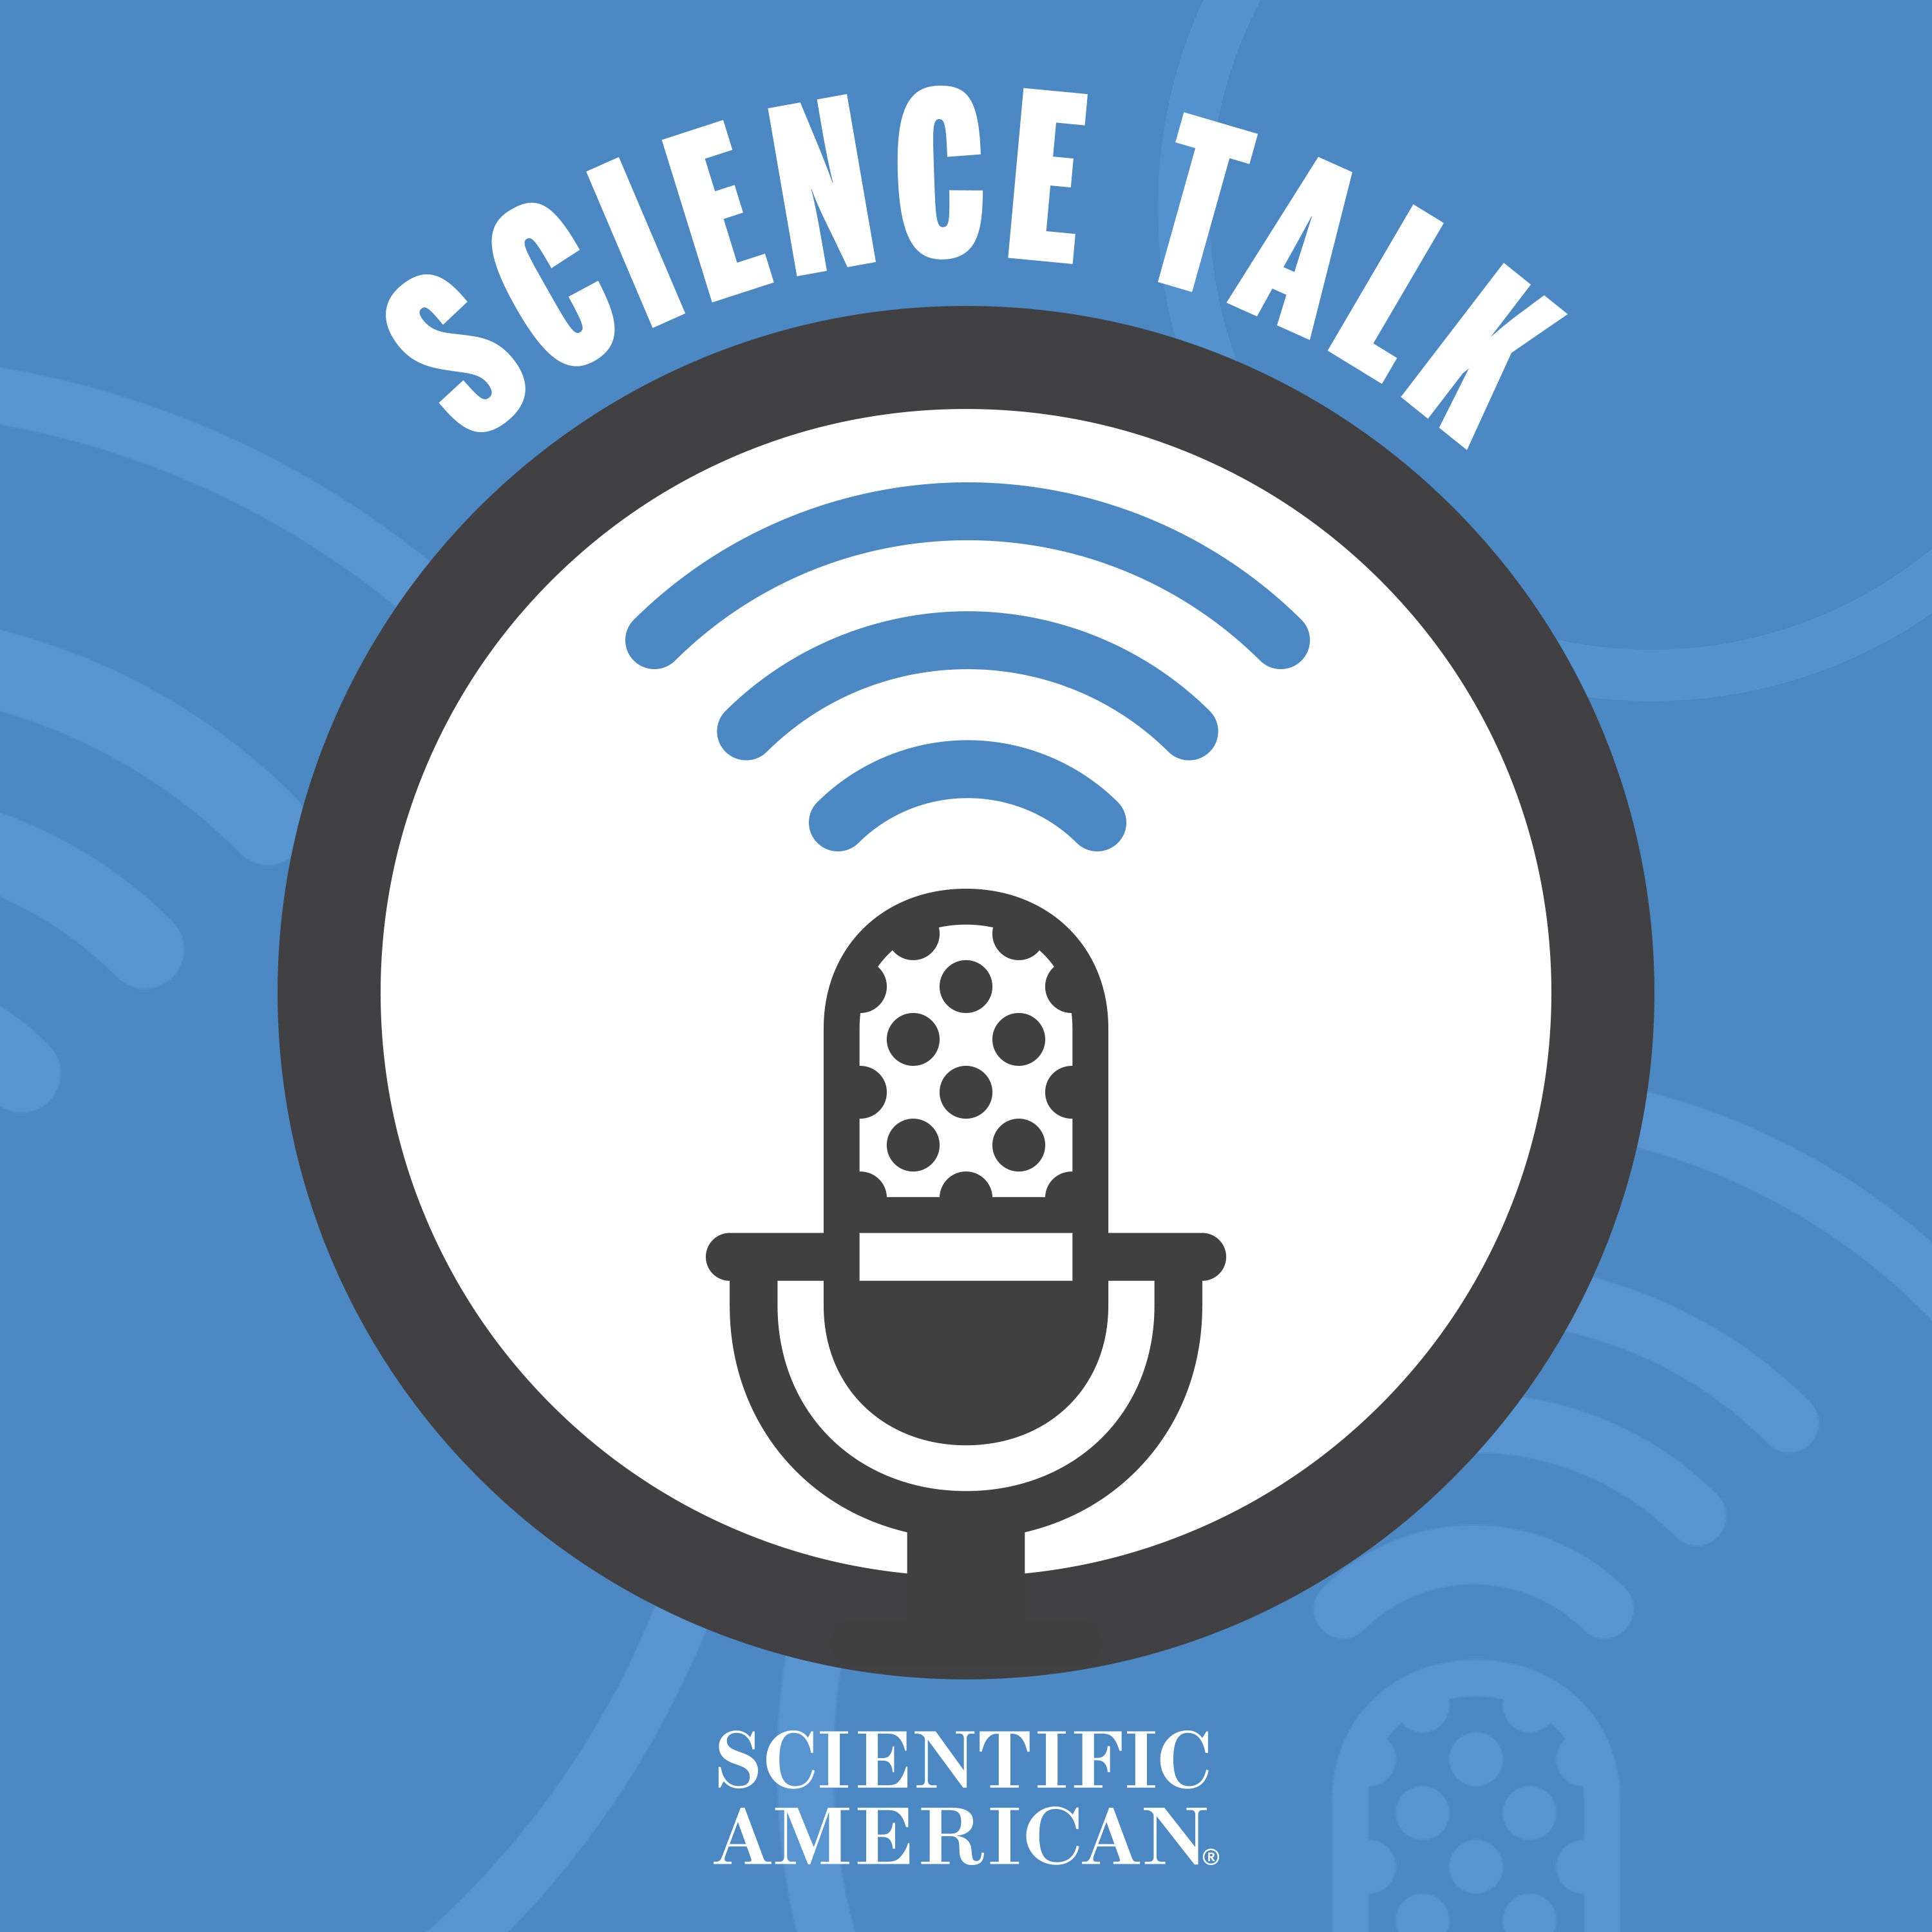 Science Talk Podcast By Scientific American Summary On Smash Notes